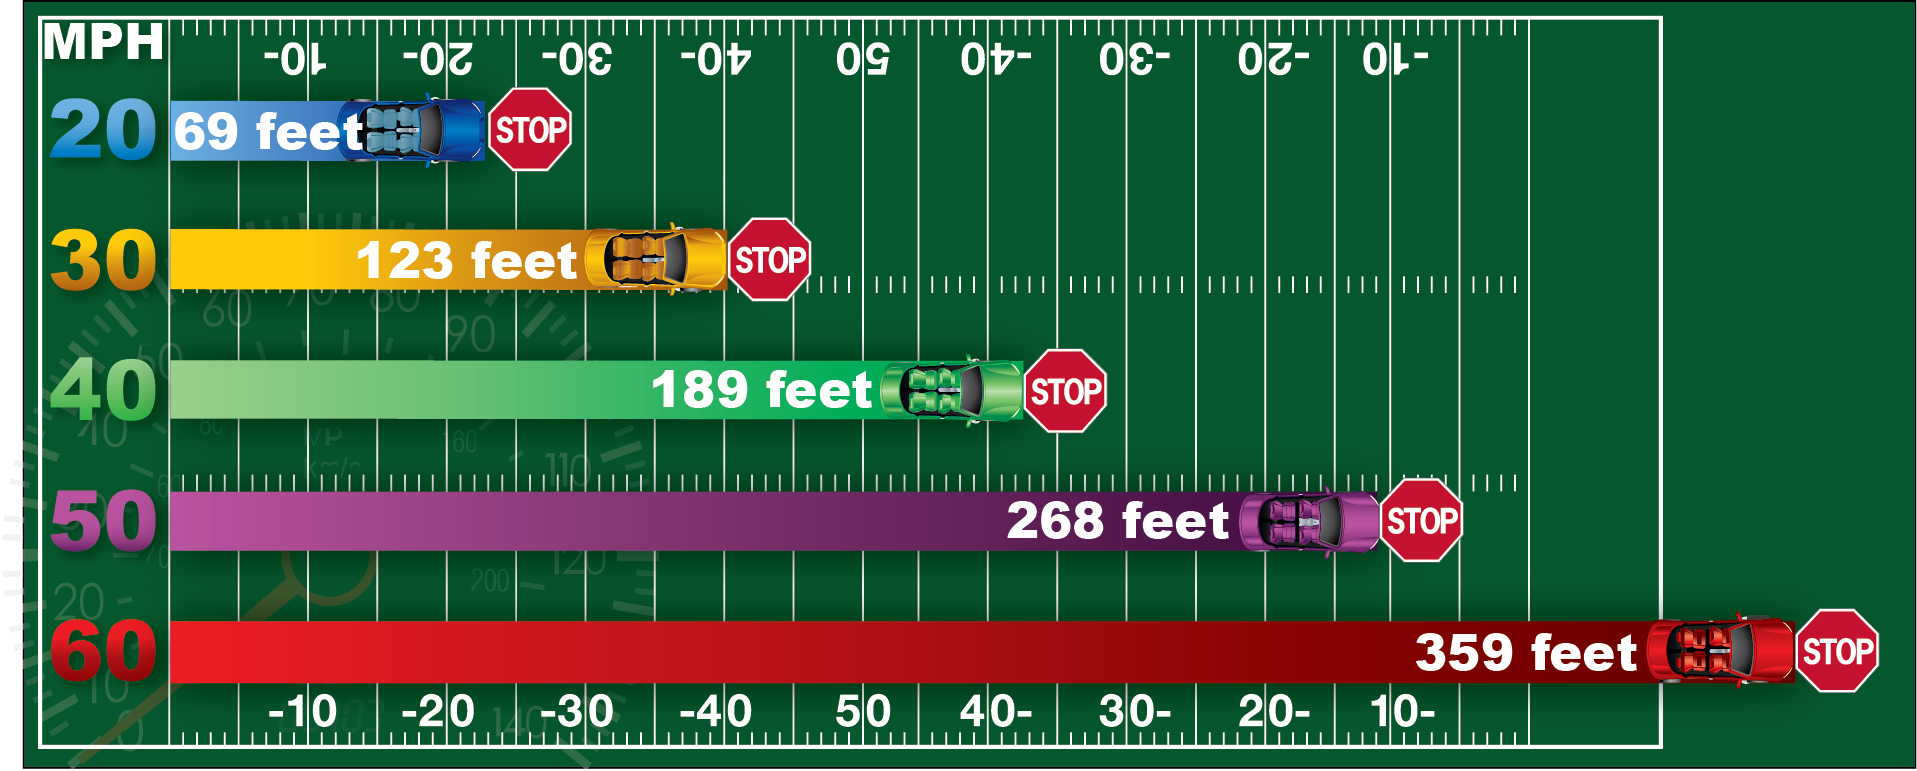 stopping distances depending on how miles per hour chart